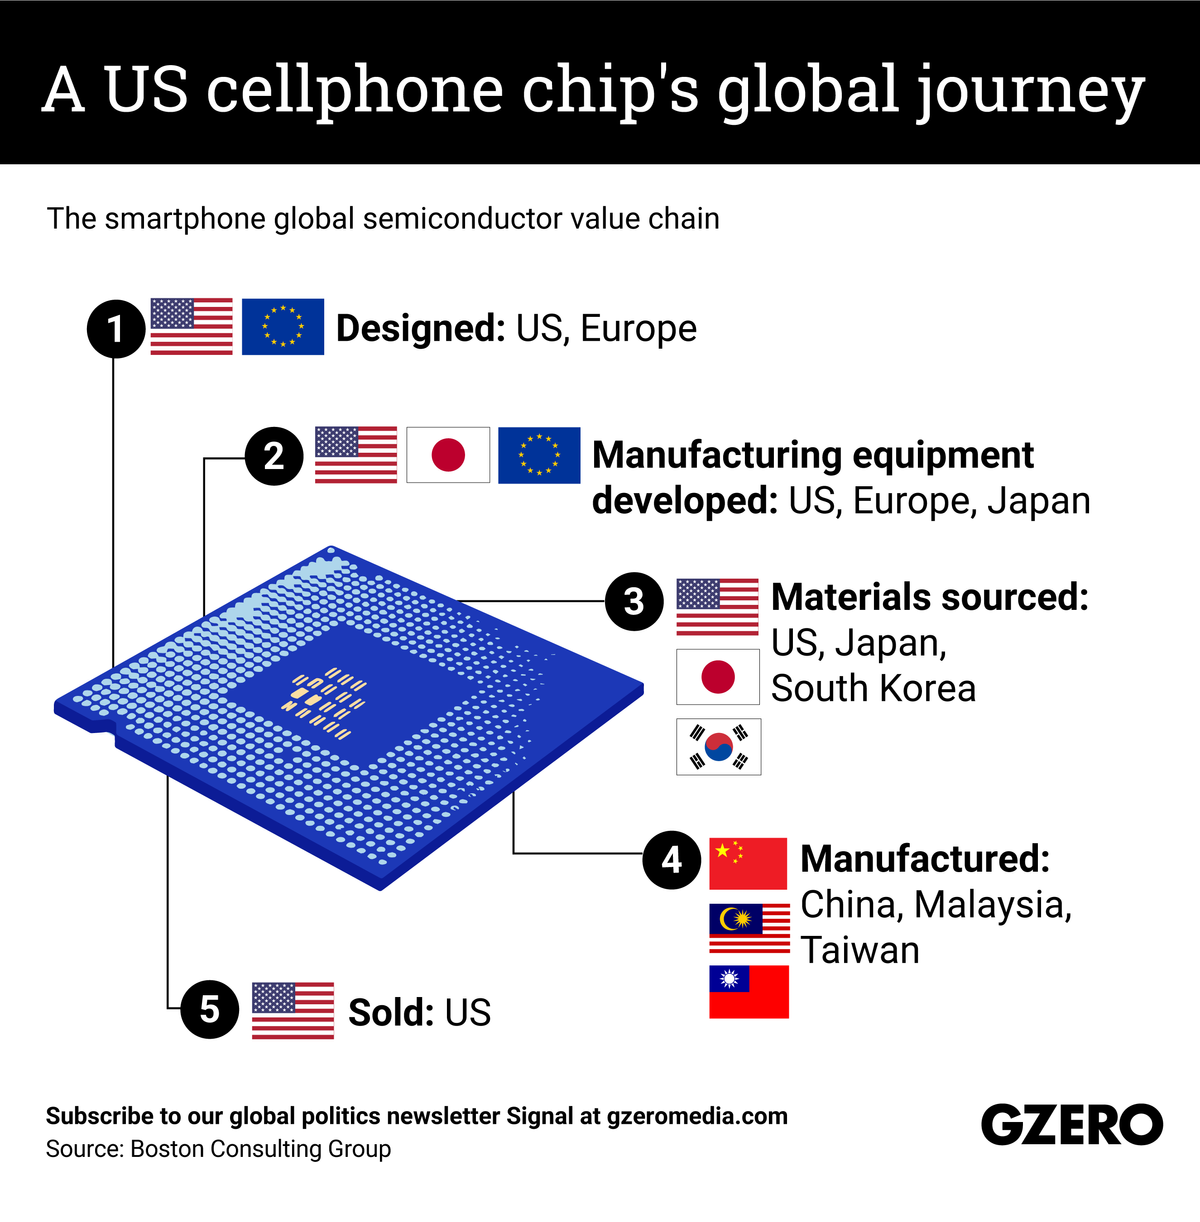 A US cellphone chip's global journey